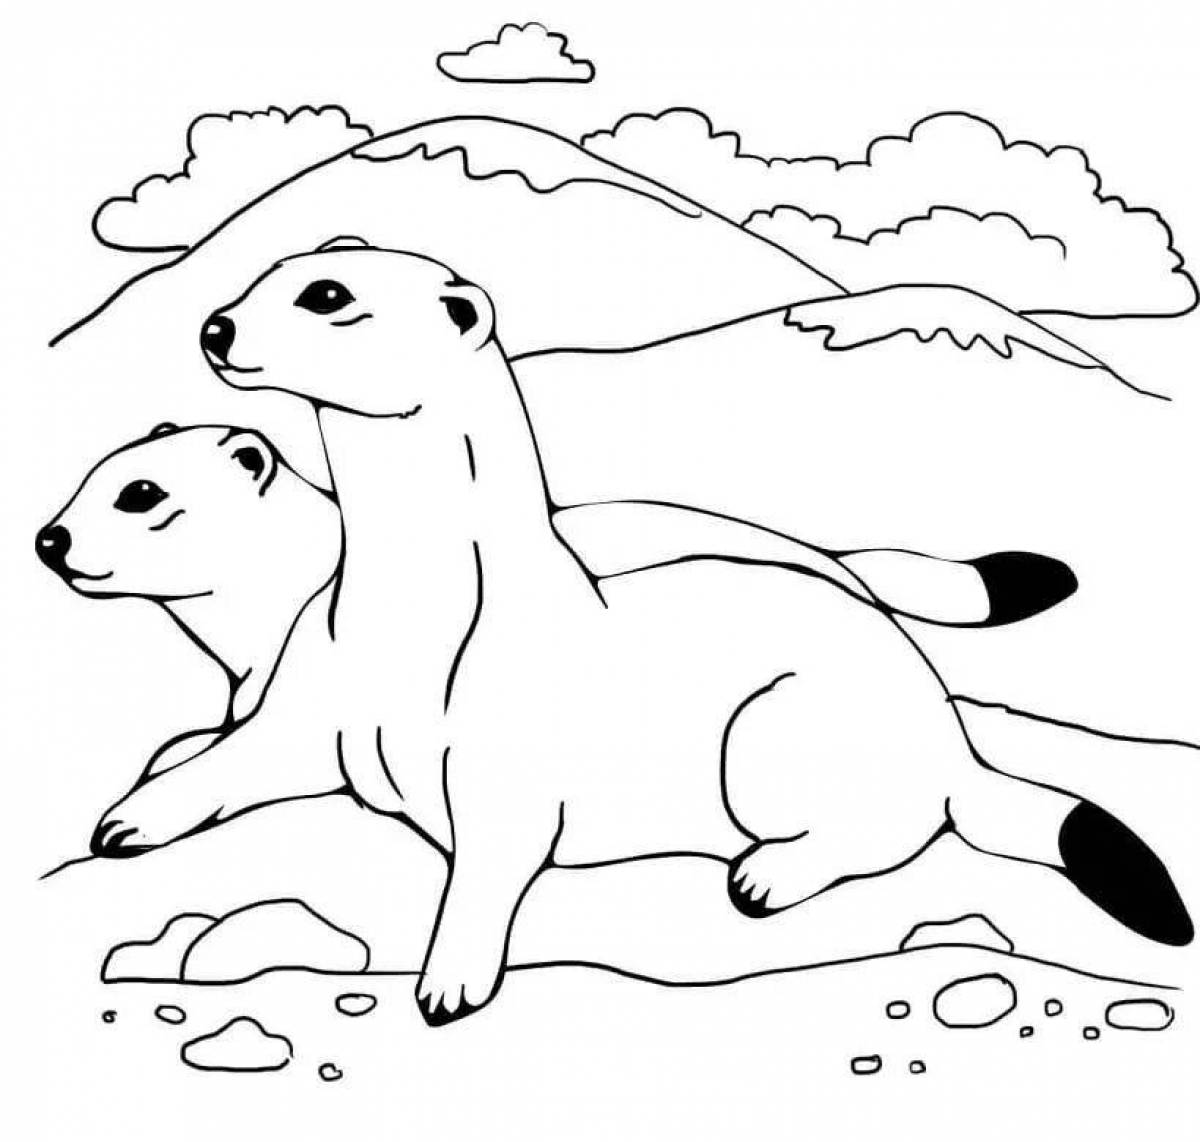 Playful ferret coloring page for kids